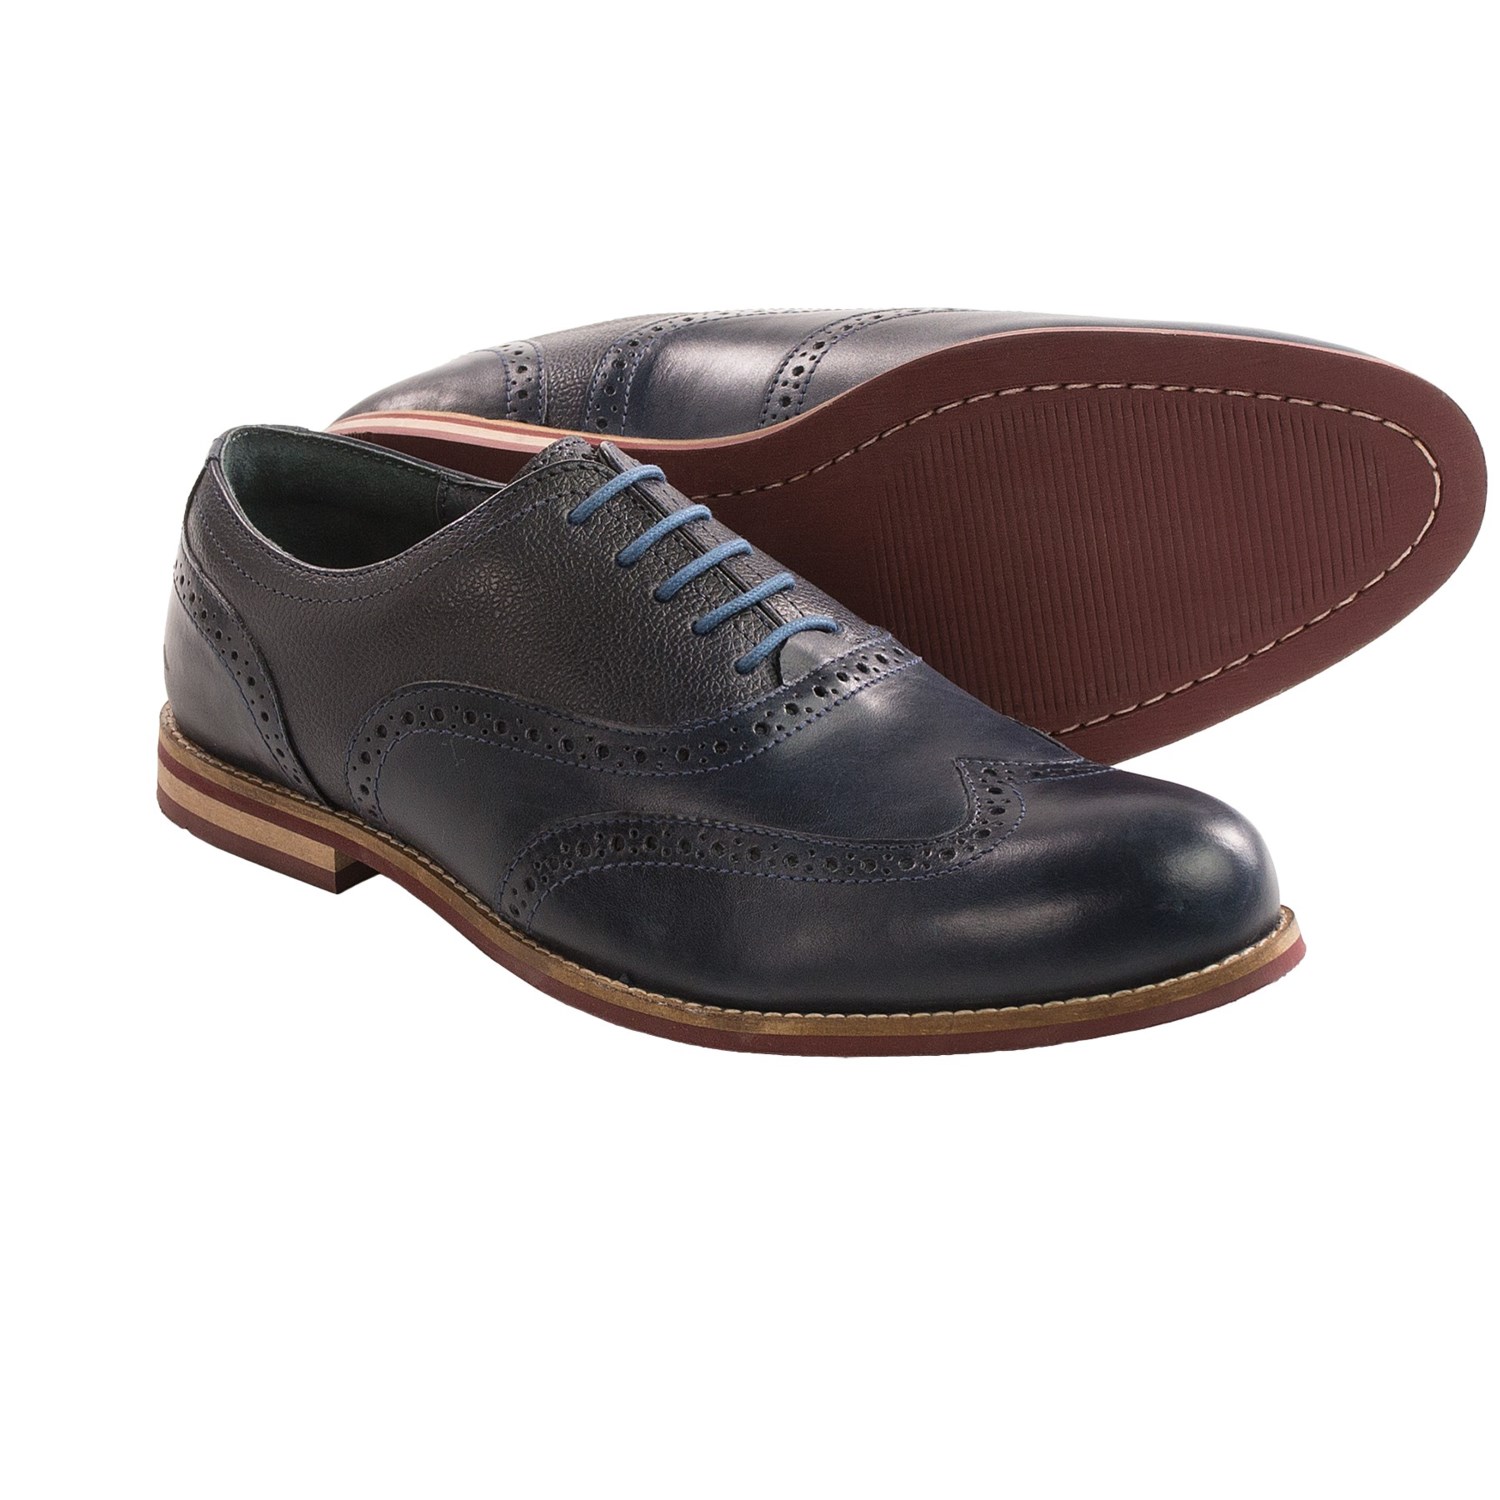 Joseph Abboud Randall Oxford Shoes (For Men) Save 71